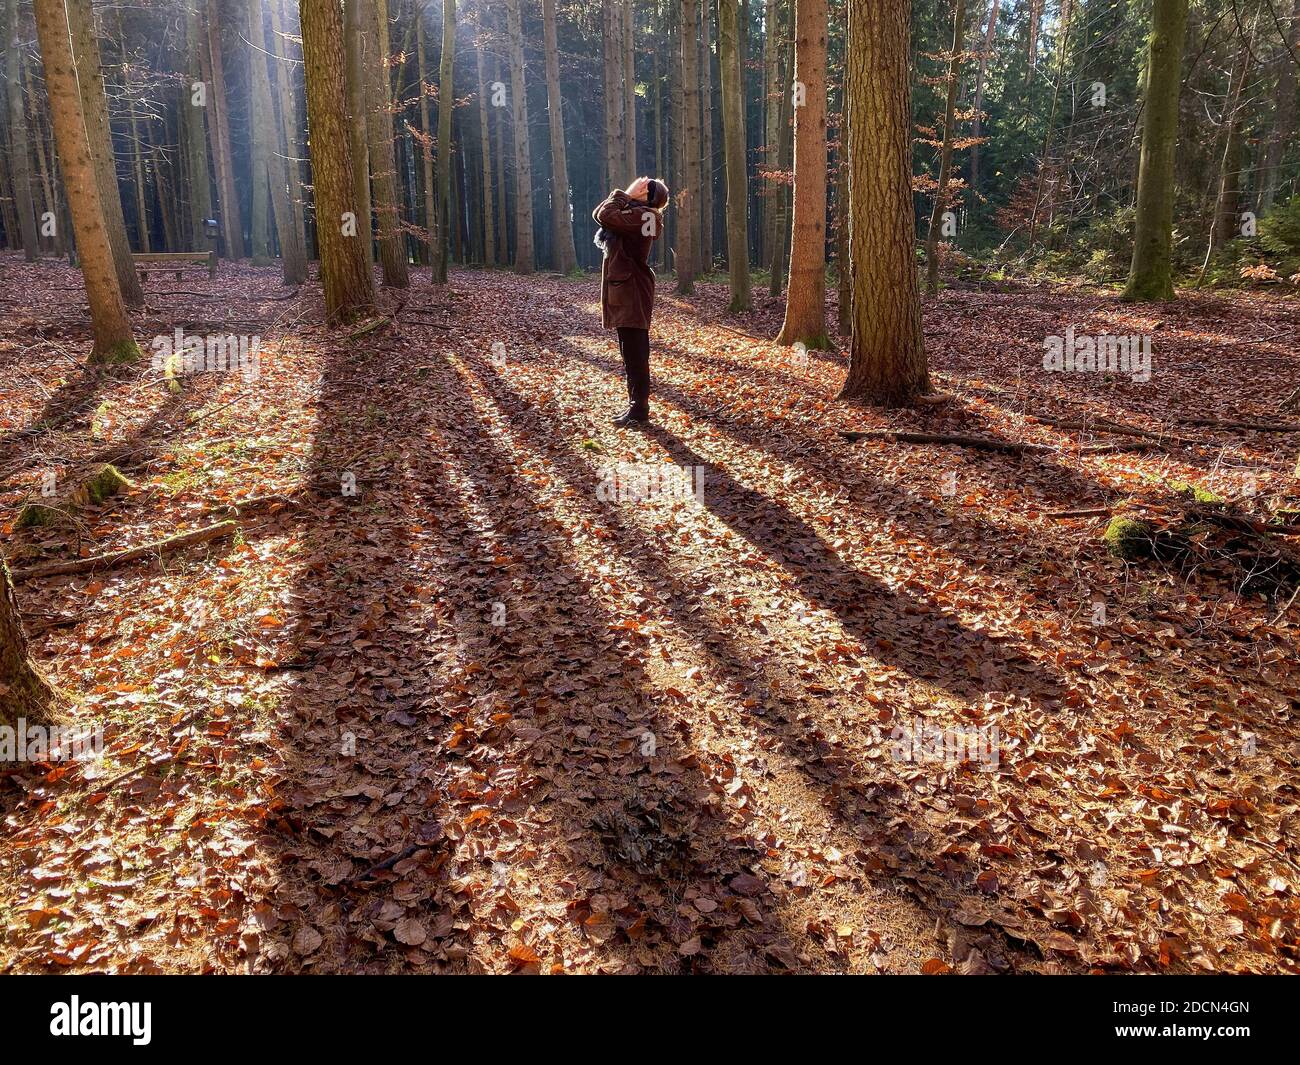 A woman is walking through the forest in autumn, forest bathing, or shinrin-yoku  on November 22, 2020 in Pfaffenhofen a.d.Ilm, Bavaria, Germany. Forest bath – has the power to counter illnesses including cancer, strokes, gastric ulcers, depression. The term emerged in Japan in the 1980s as a physiological and psychological exercise called shinrin-yoku (“forest bathing” or “taking in the forest). © Peter Schatz / Alamy Stock Photos  MODEL RELEASED Stock Photo